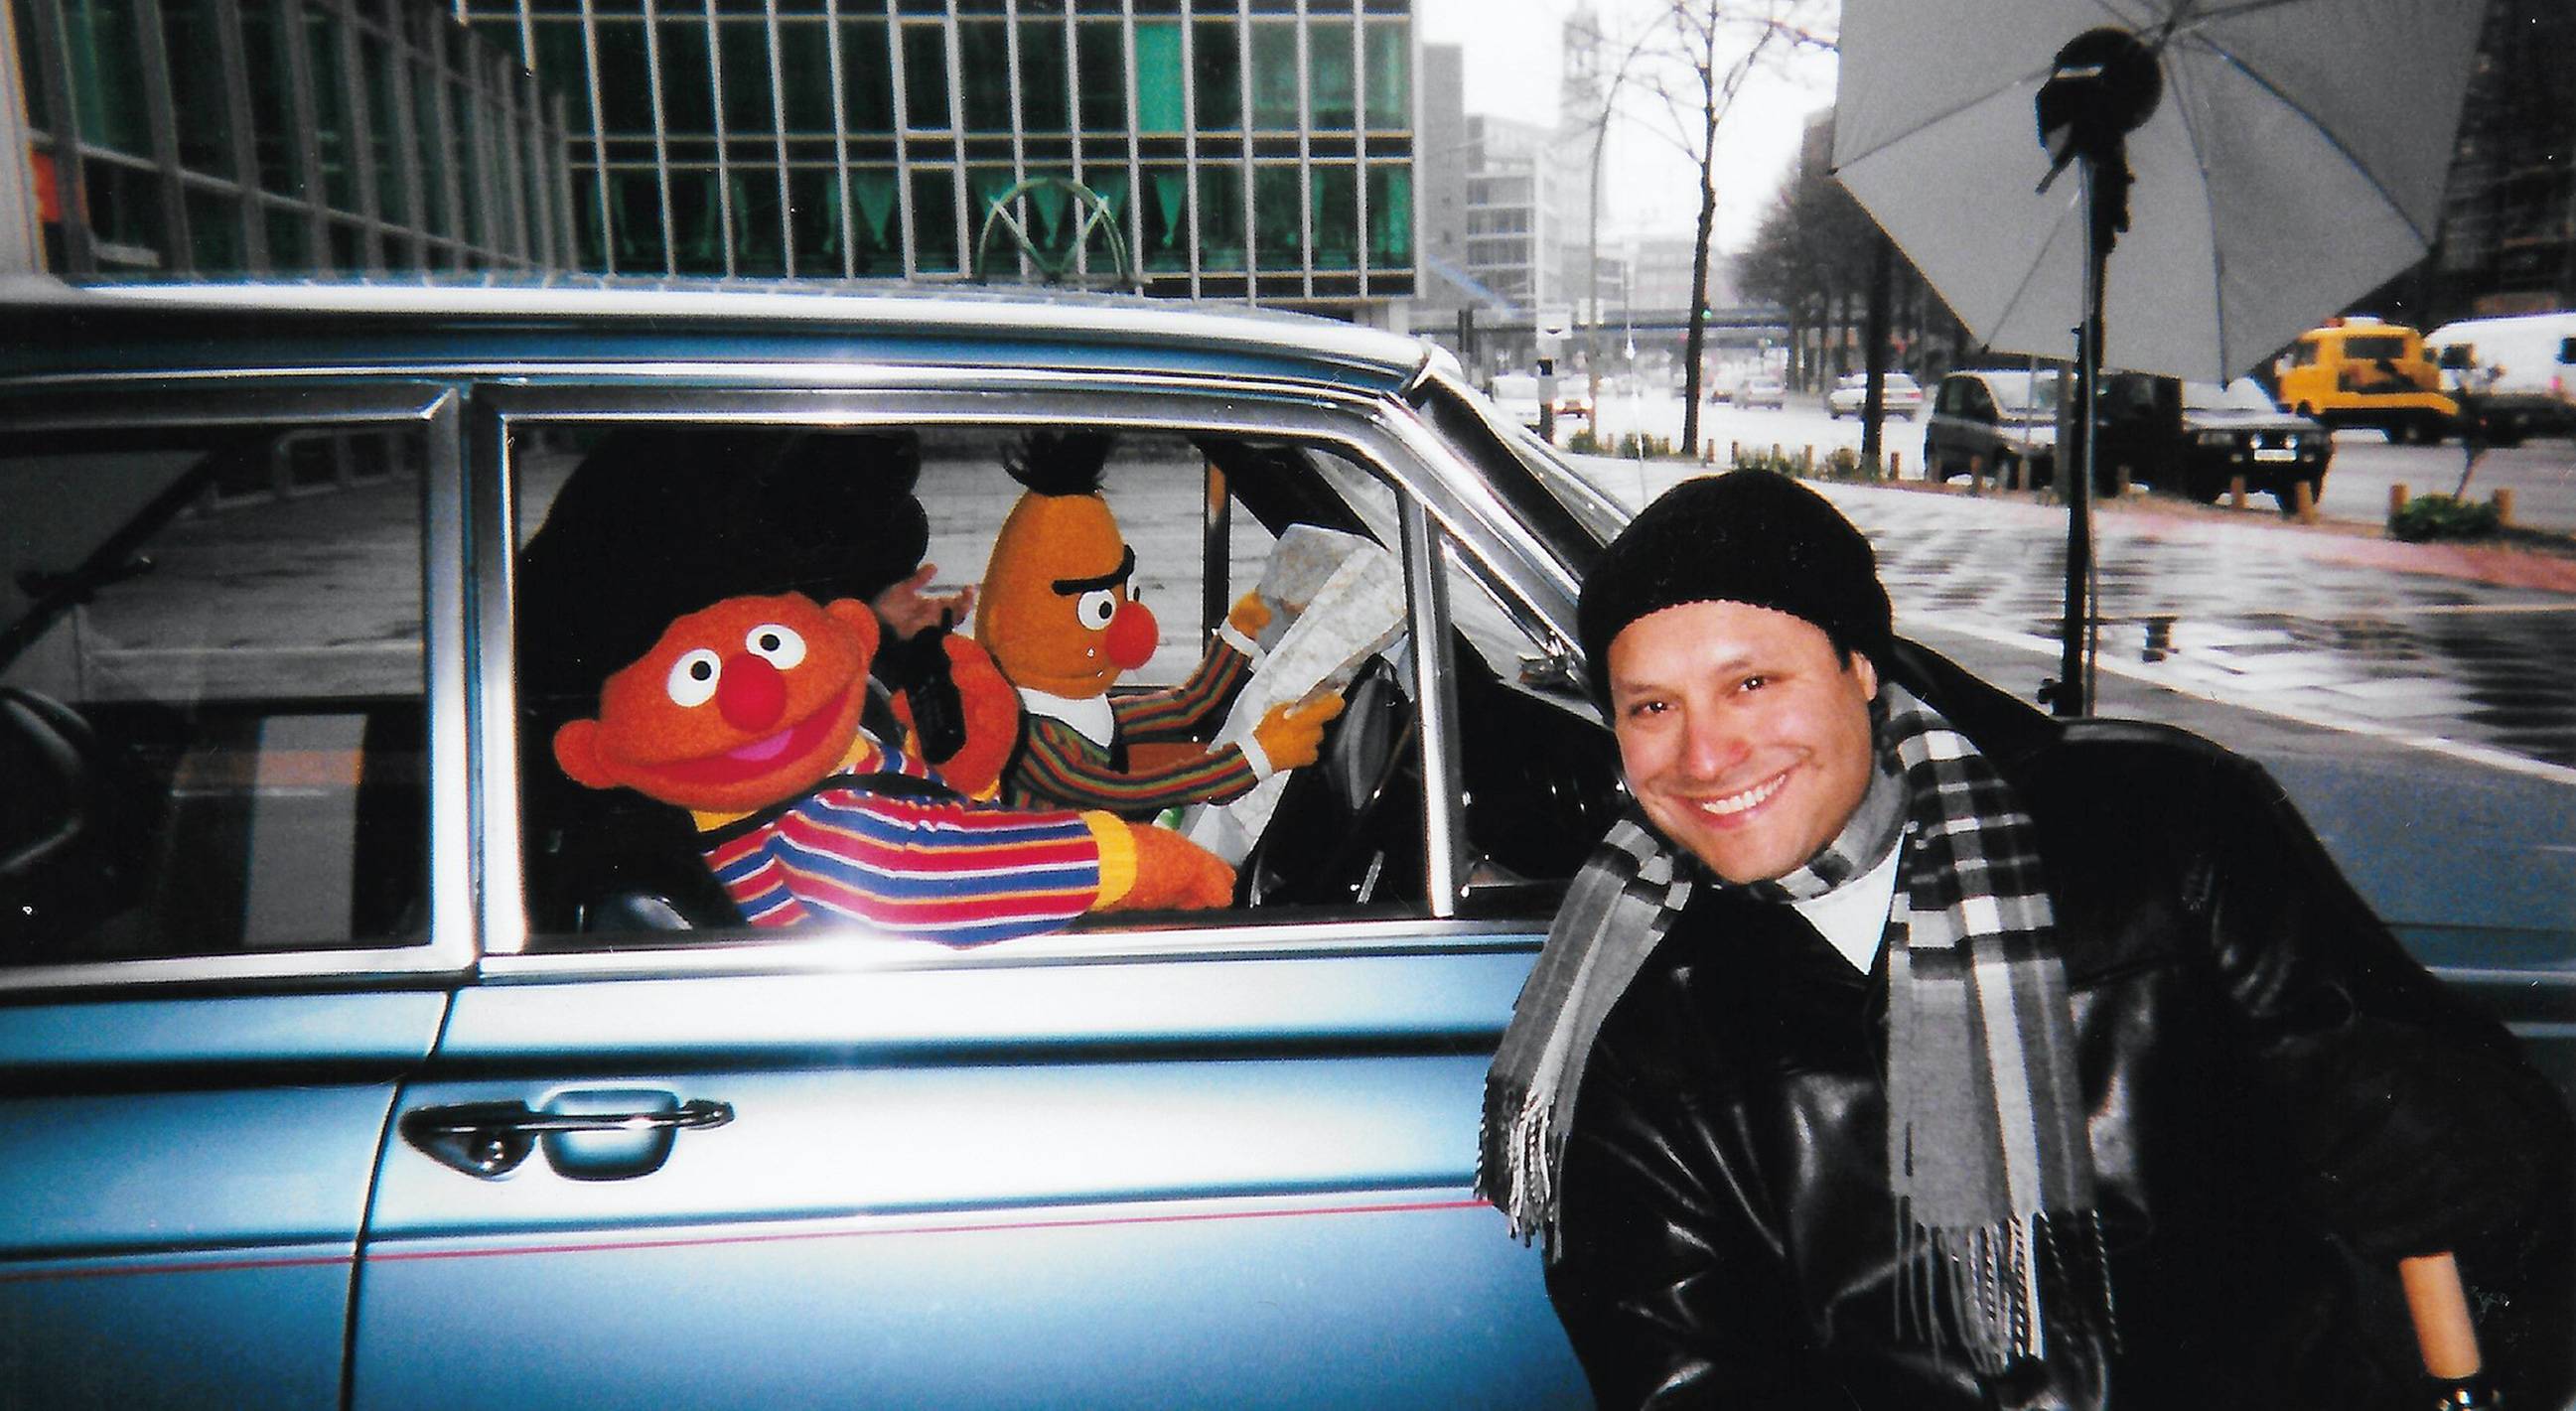 roger estrada next to car with muppet characters in it